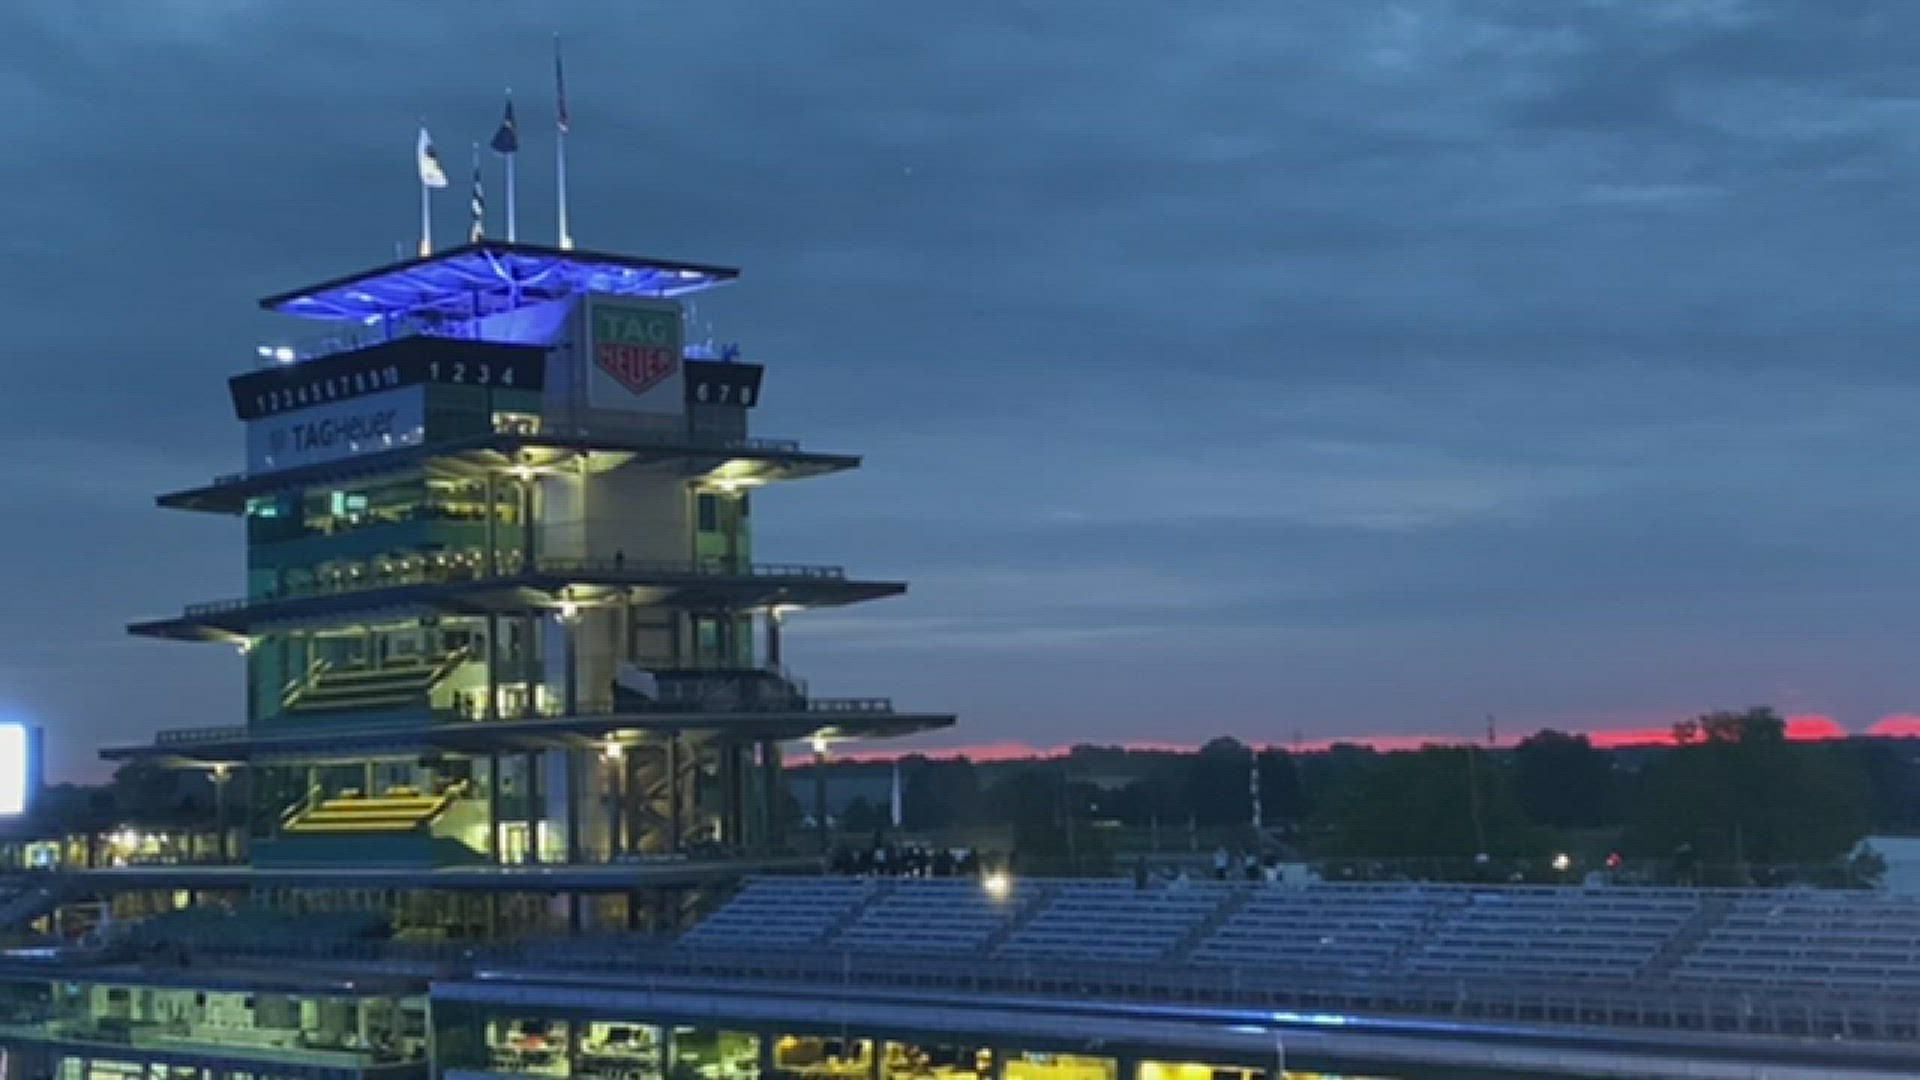 At 6 a.m. on Race Day, a cannon and fireworks welcomed fans to the 107th Running of the Indy 500.